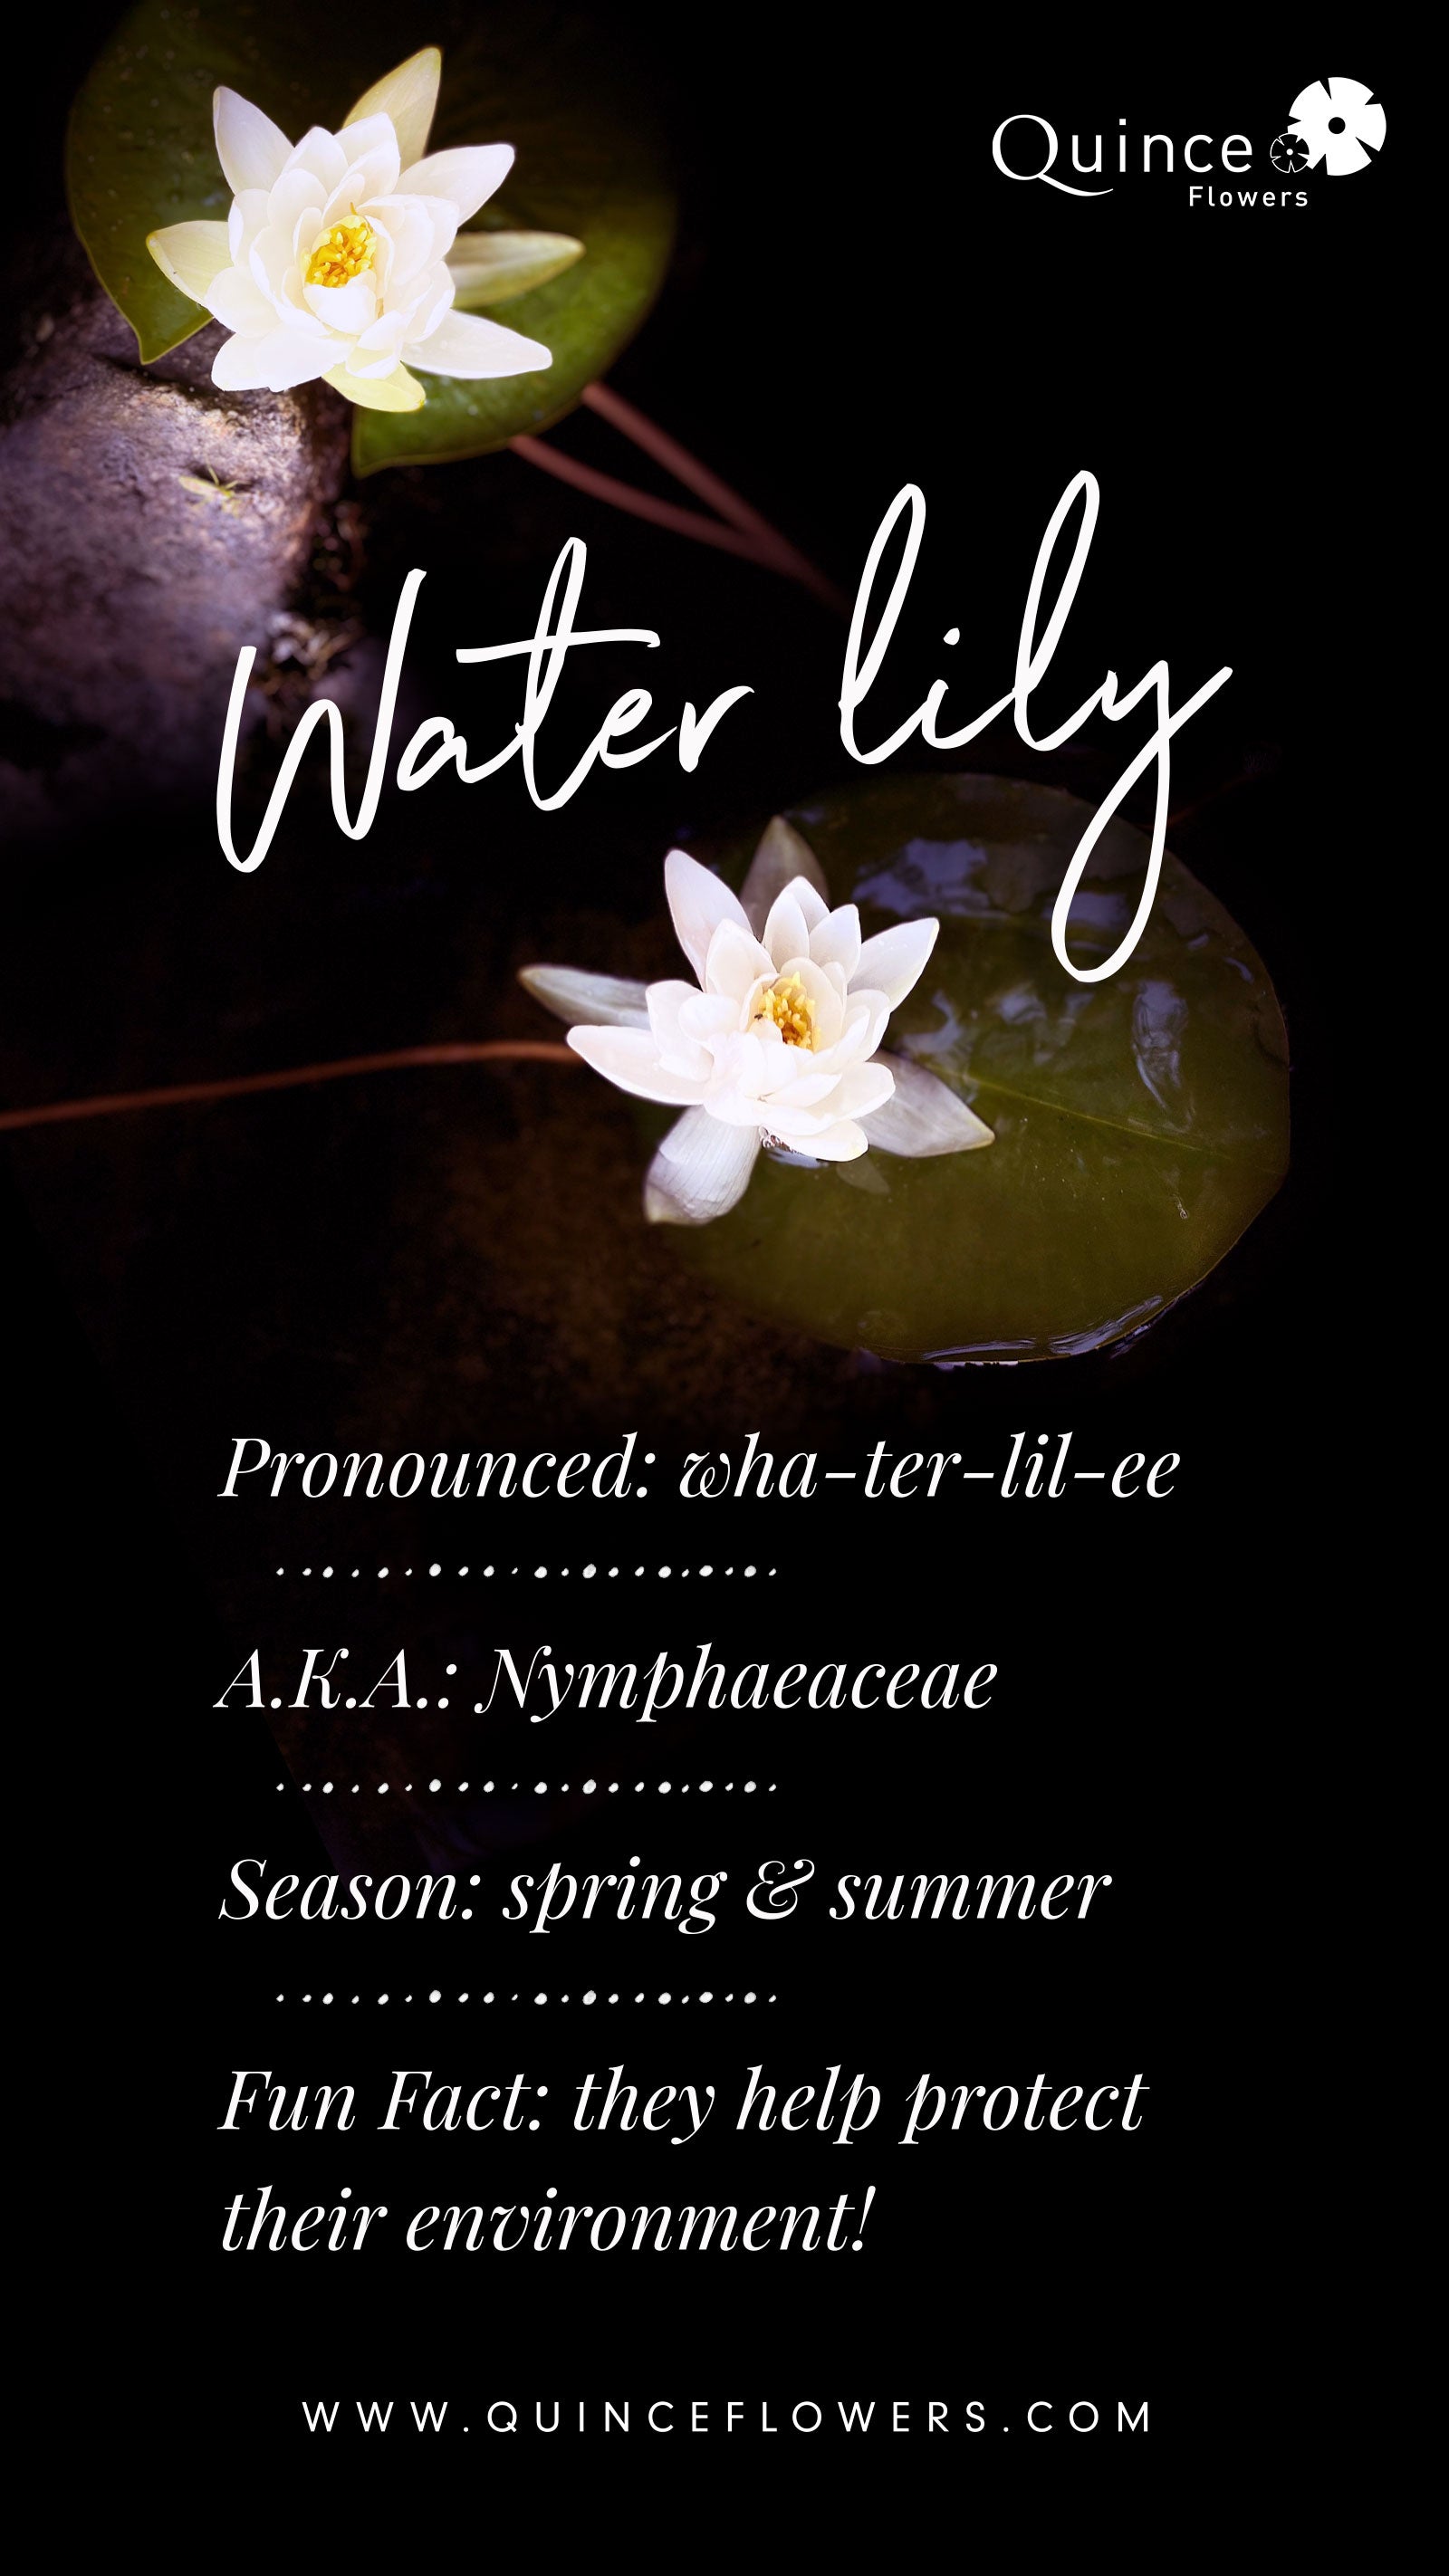 An image of two white water lilies with the text ‘Water lily’ written in elegant cursive font. Order online for plants & flowers from the best florist in Toronto near you.